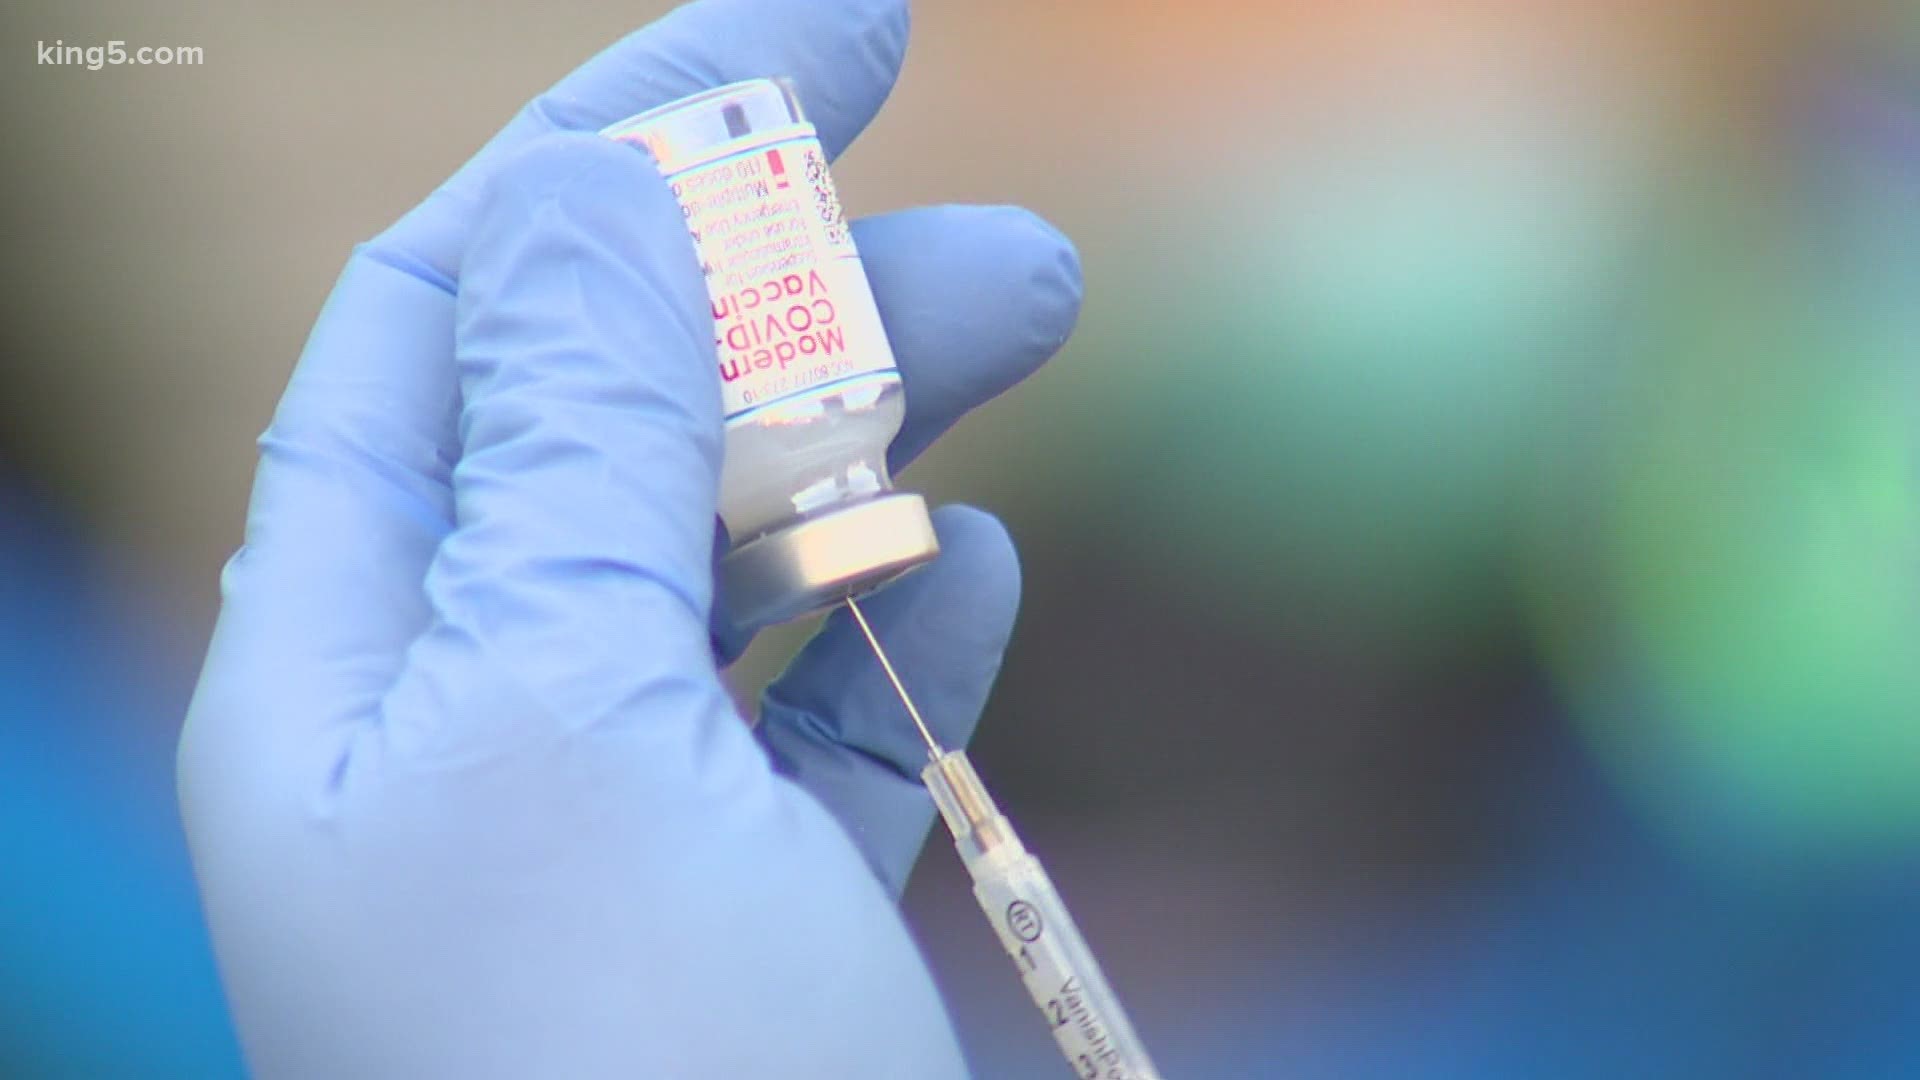 Pop-up clinics throughout western Washington are getting the first dose of the COVID-19 vaccine to residents.